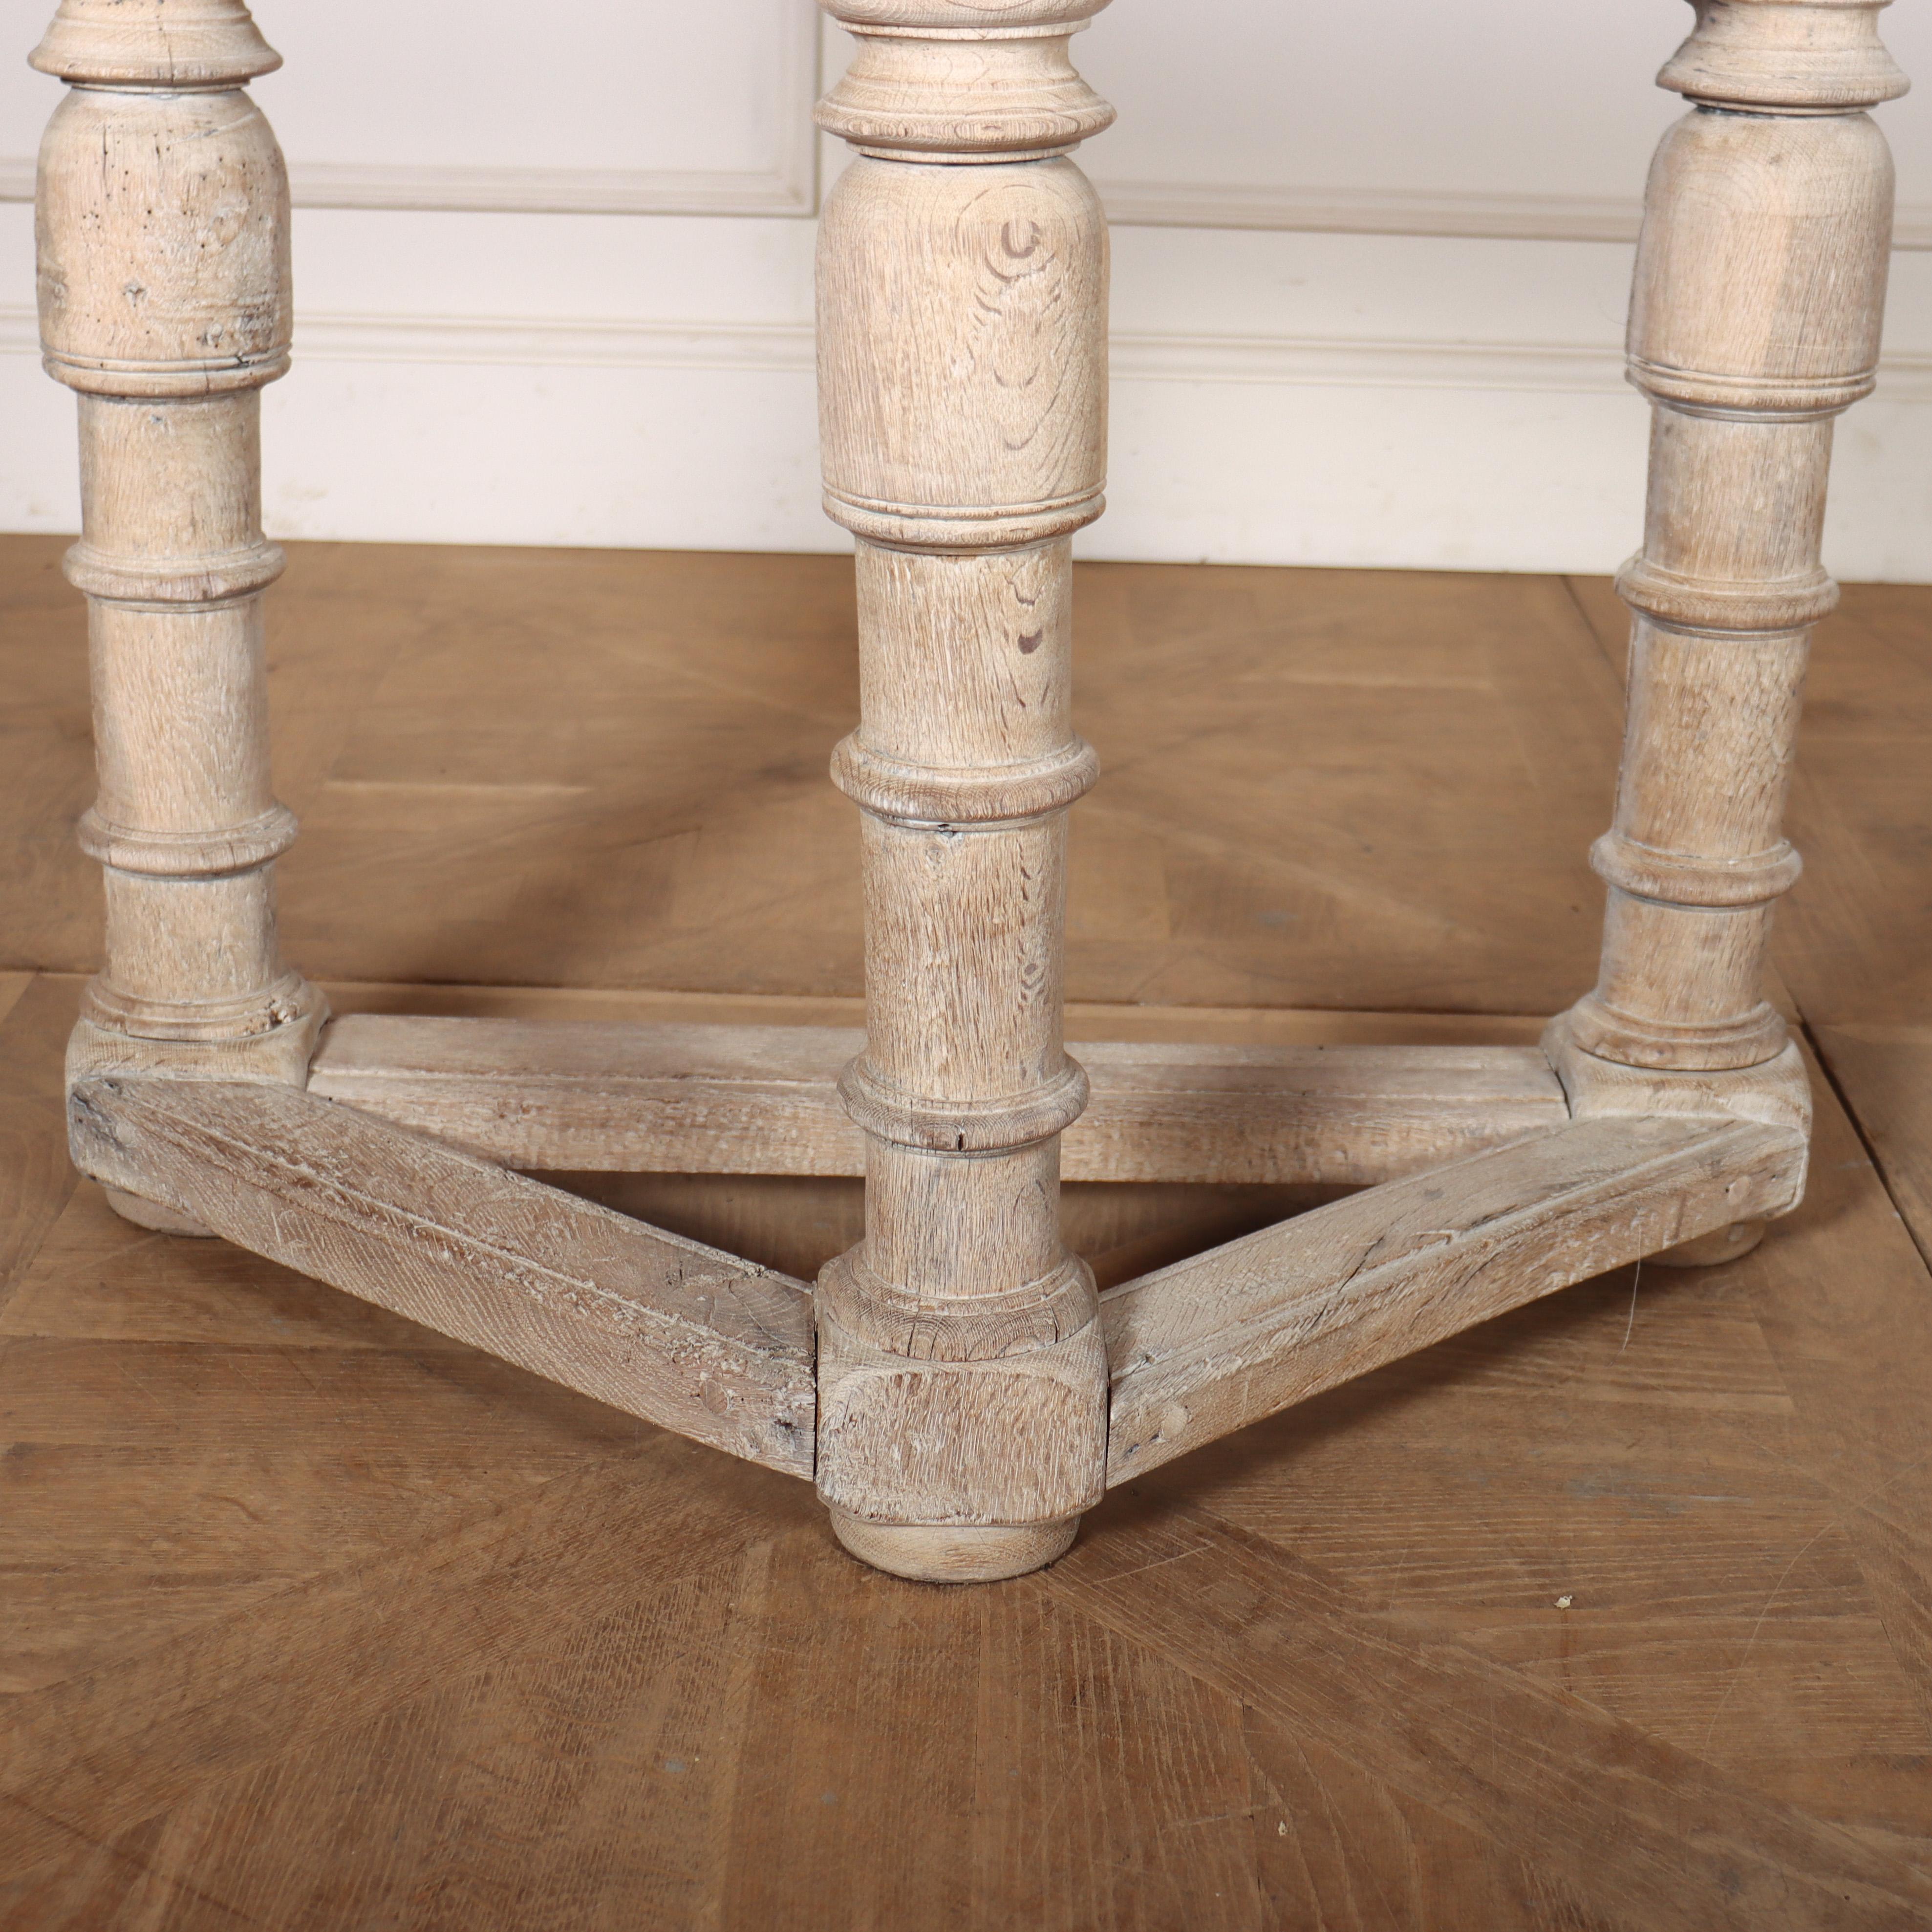 18th C Dutch bleached oak console table with a swing back leg that supports a round top. 1760.

Width when leaf is extended is 35